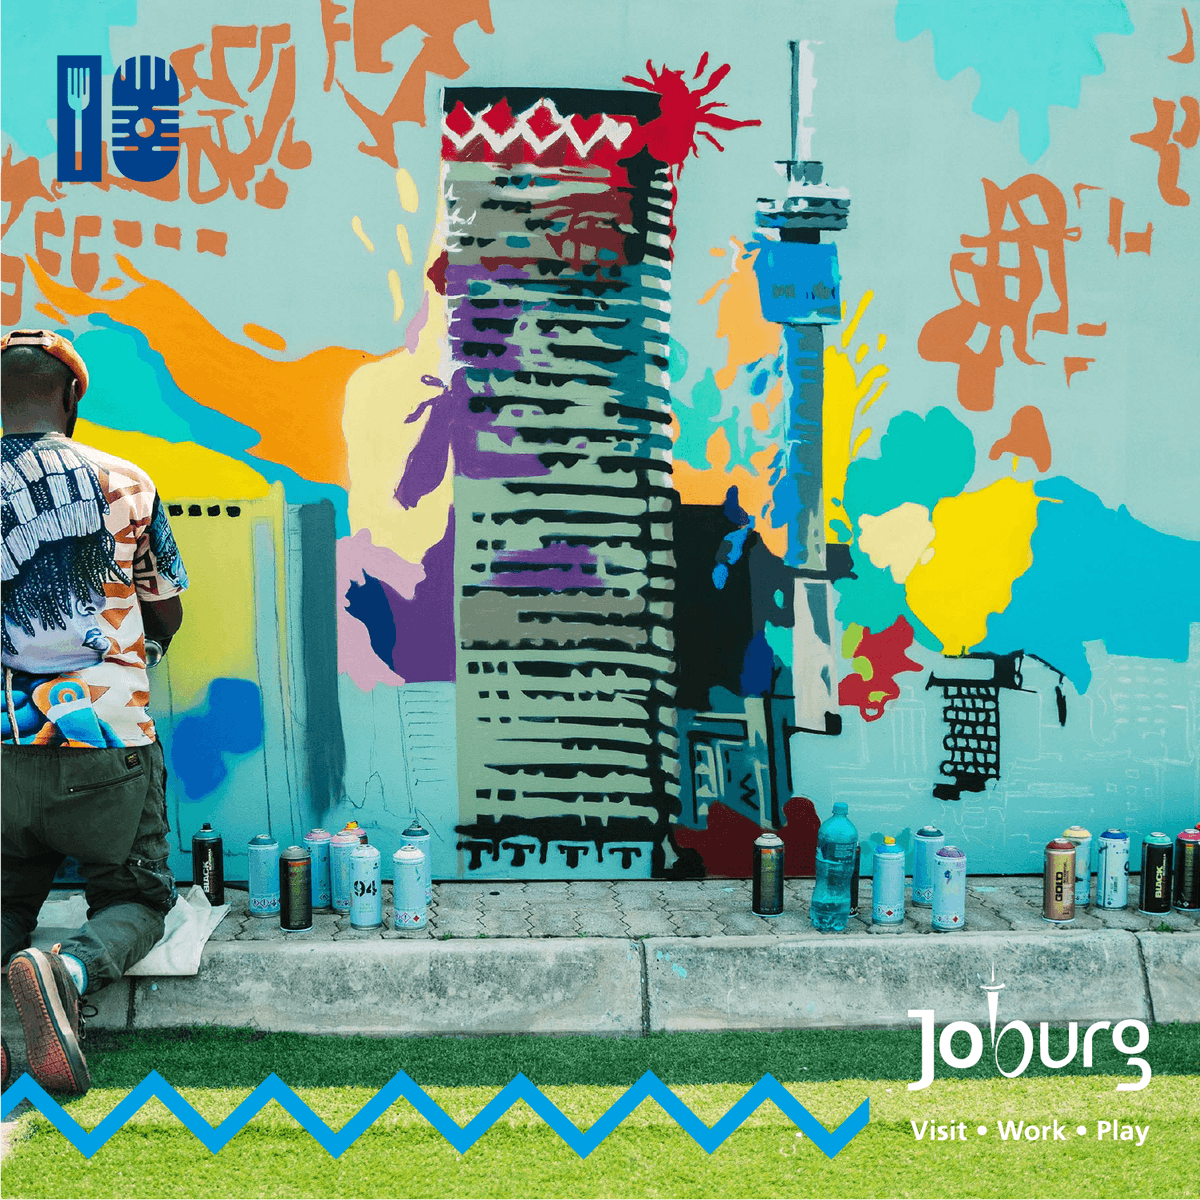 Joburg, you've truly outdone yourself as the proud host of the #DStvDeliciousFestival. Your electrifying energy made this festival shine. We can't wait for more amazing moments in our beloved @CityofJoburgZA. #GPLifestyle #VisitGauteng #MusicFestival #Welcome2joburg